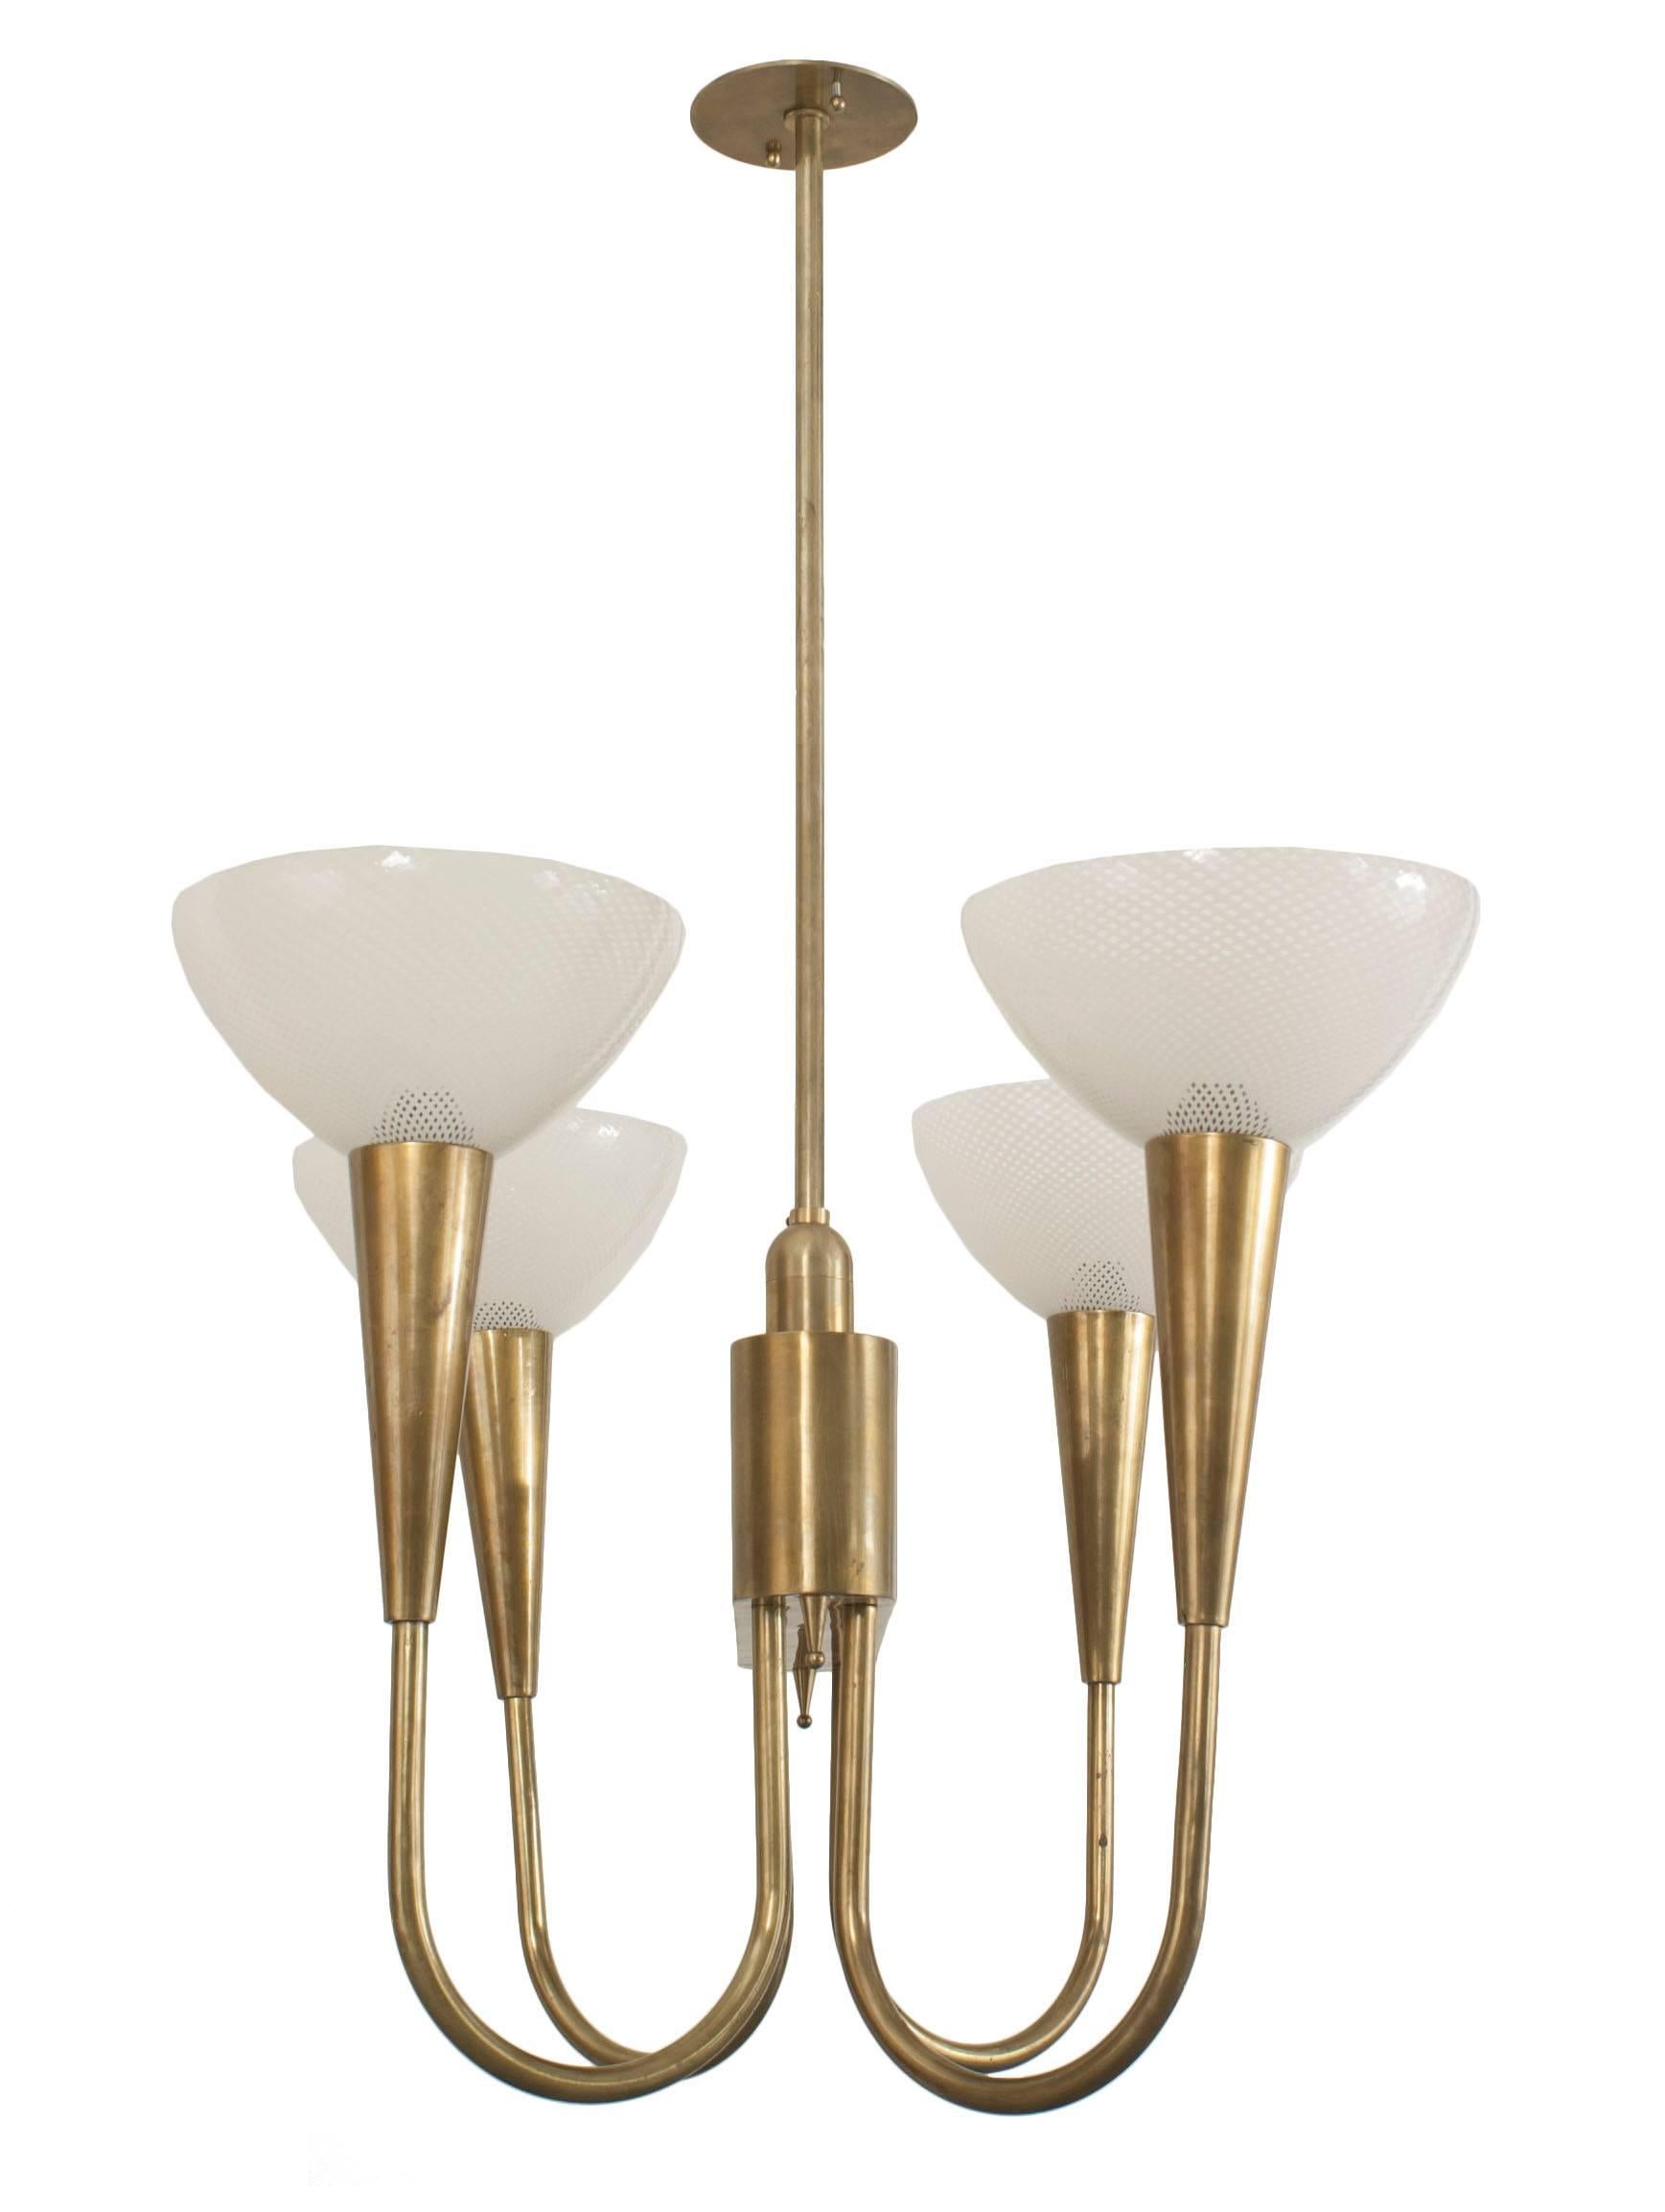 Italian mid-century (1940s) brass chandelier with an rectangular center having 4 pivoting upright arms hold large glass shades with a white and clear weave design (Paolo Venini).
 